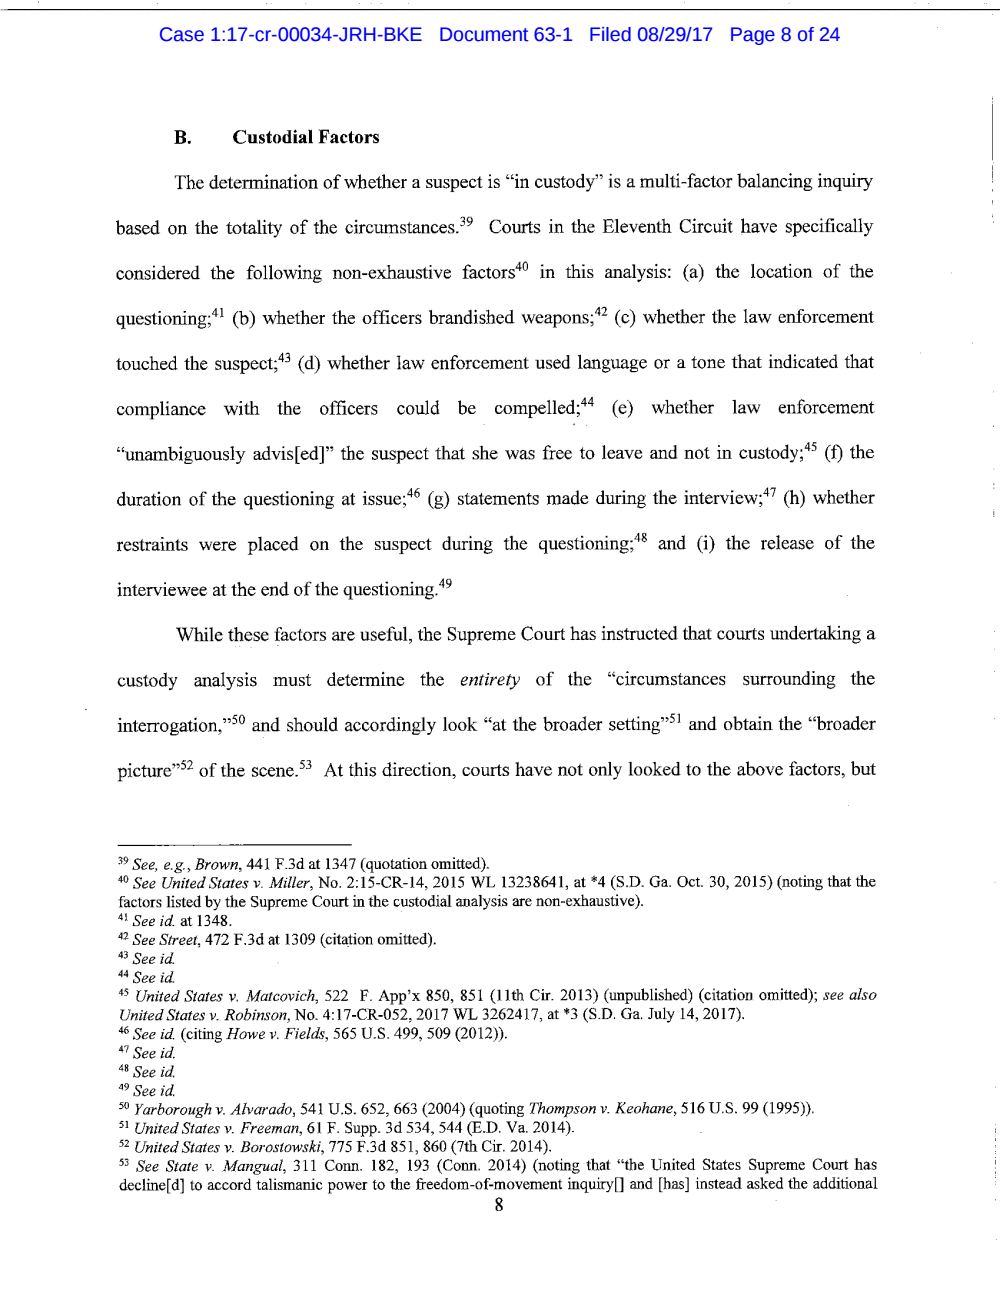 Page 8 from Reality Winner Memo in Support of Motion to Suppress